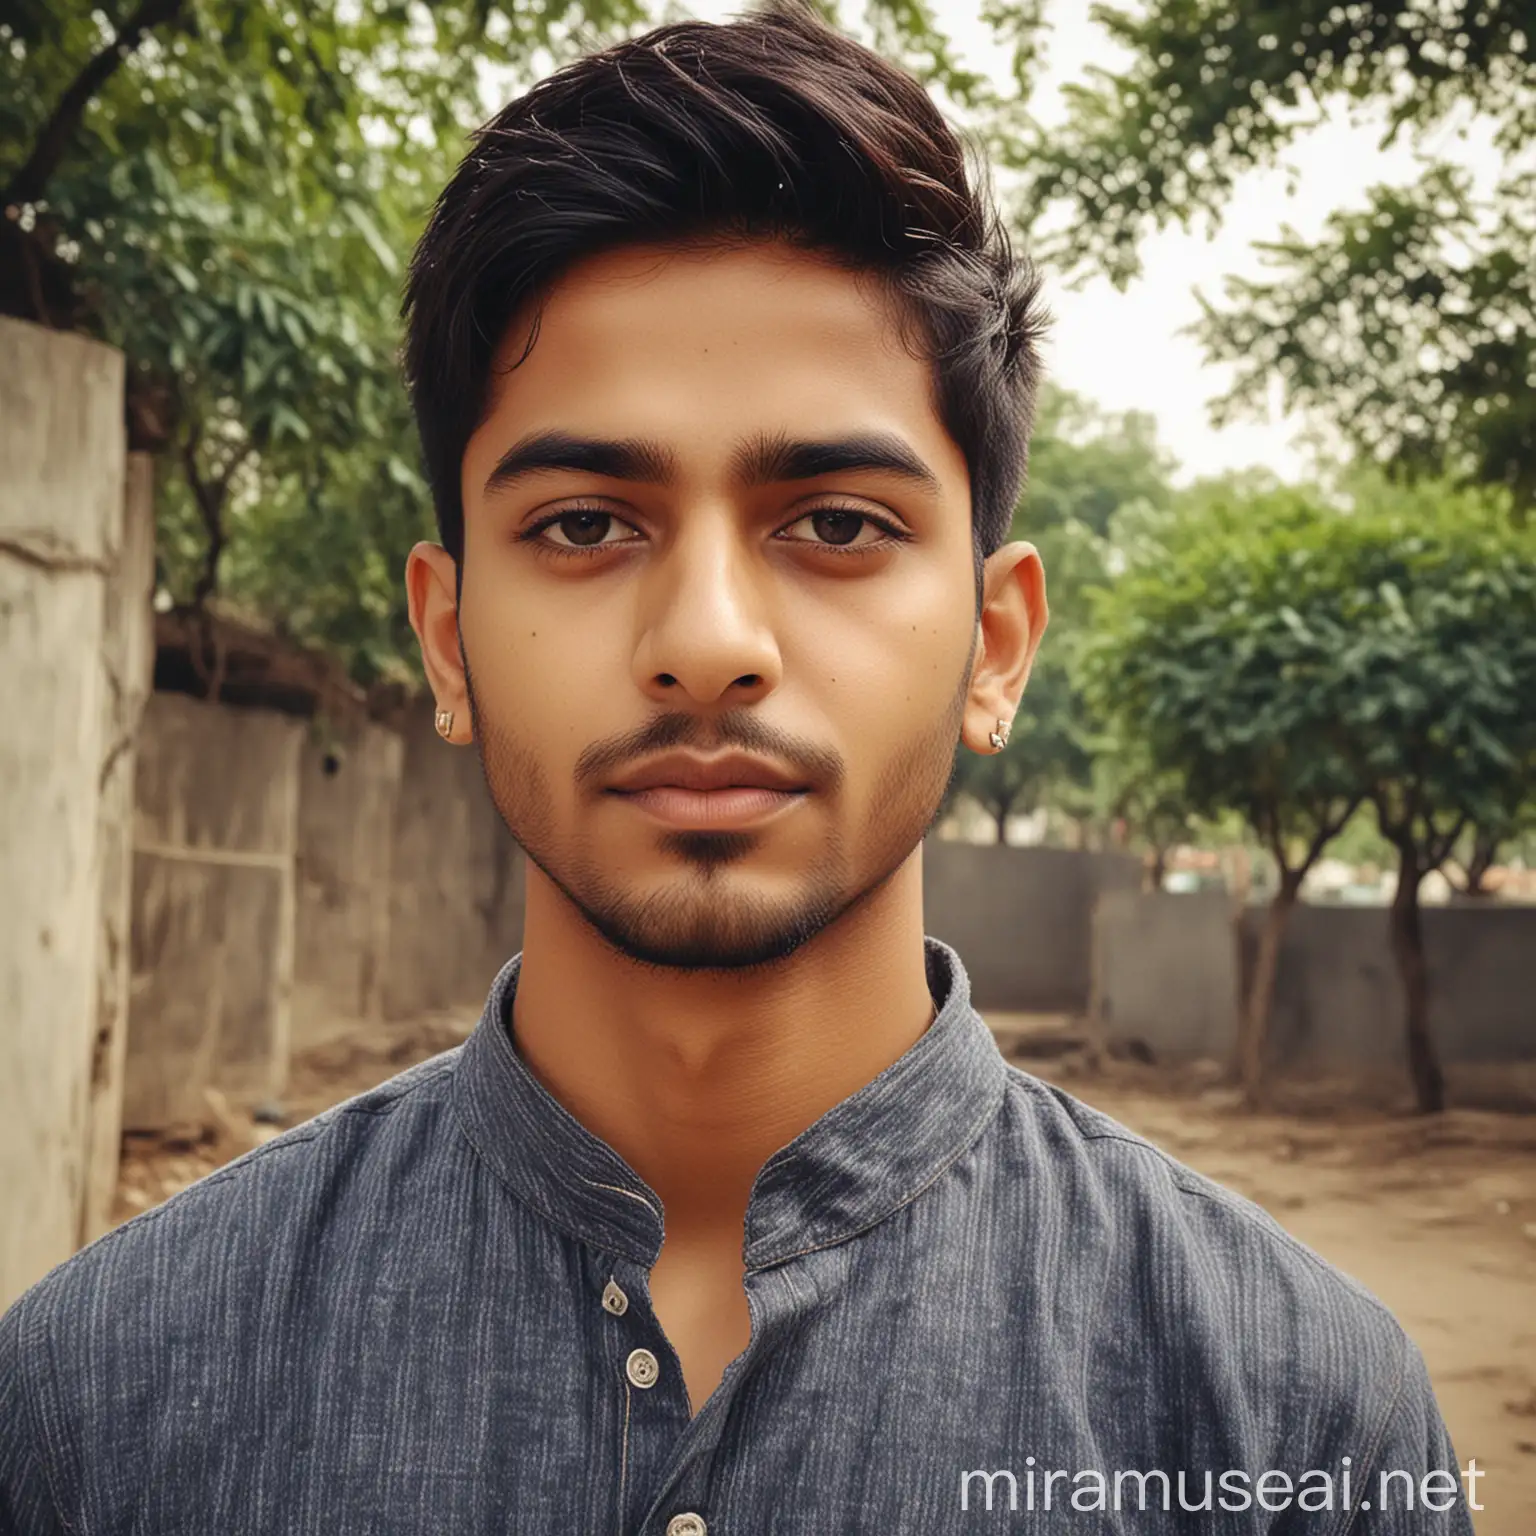 Stylish Young Indian Man Portrait in Urban Setting